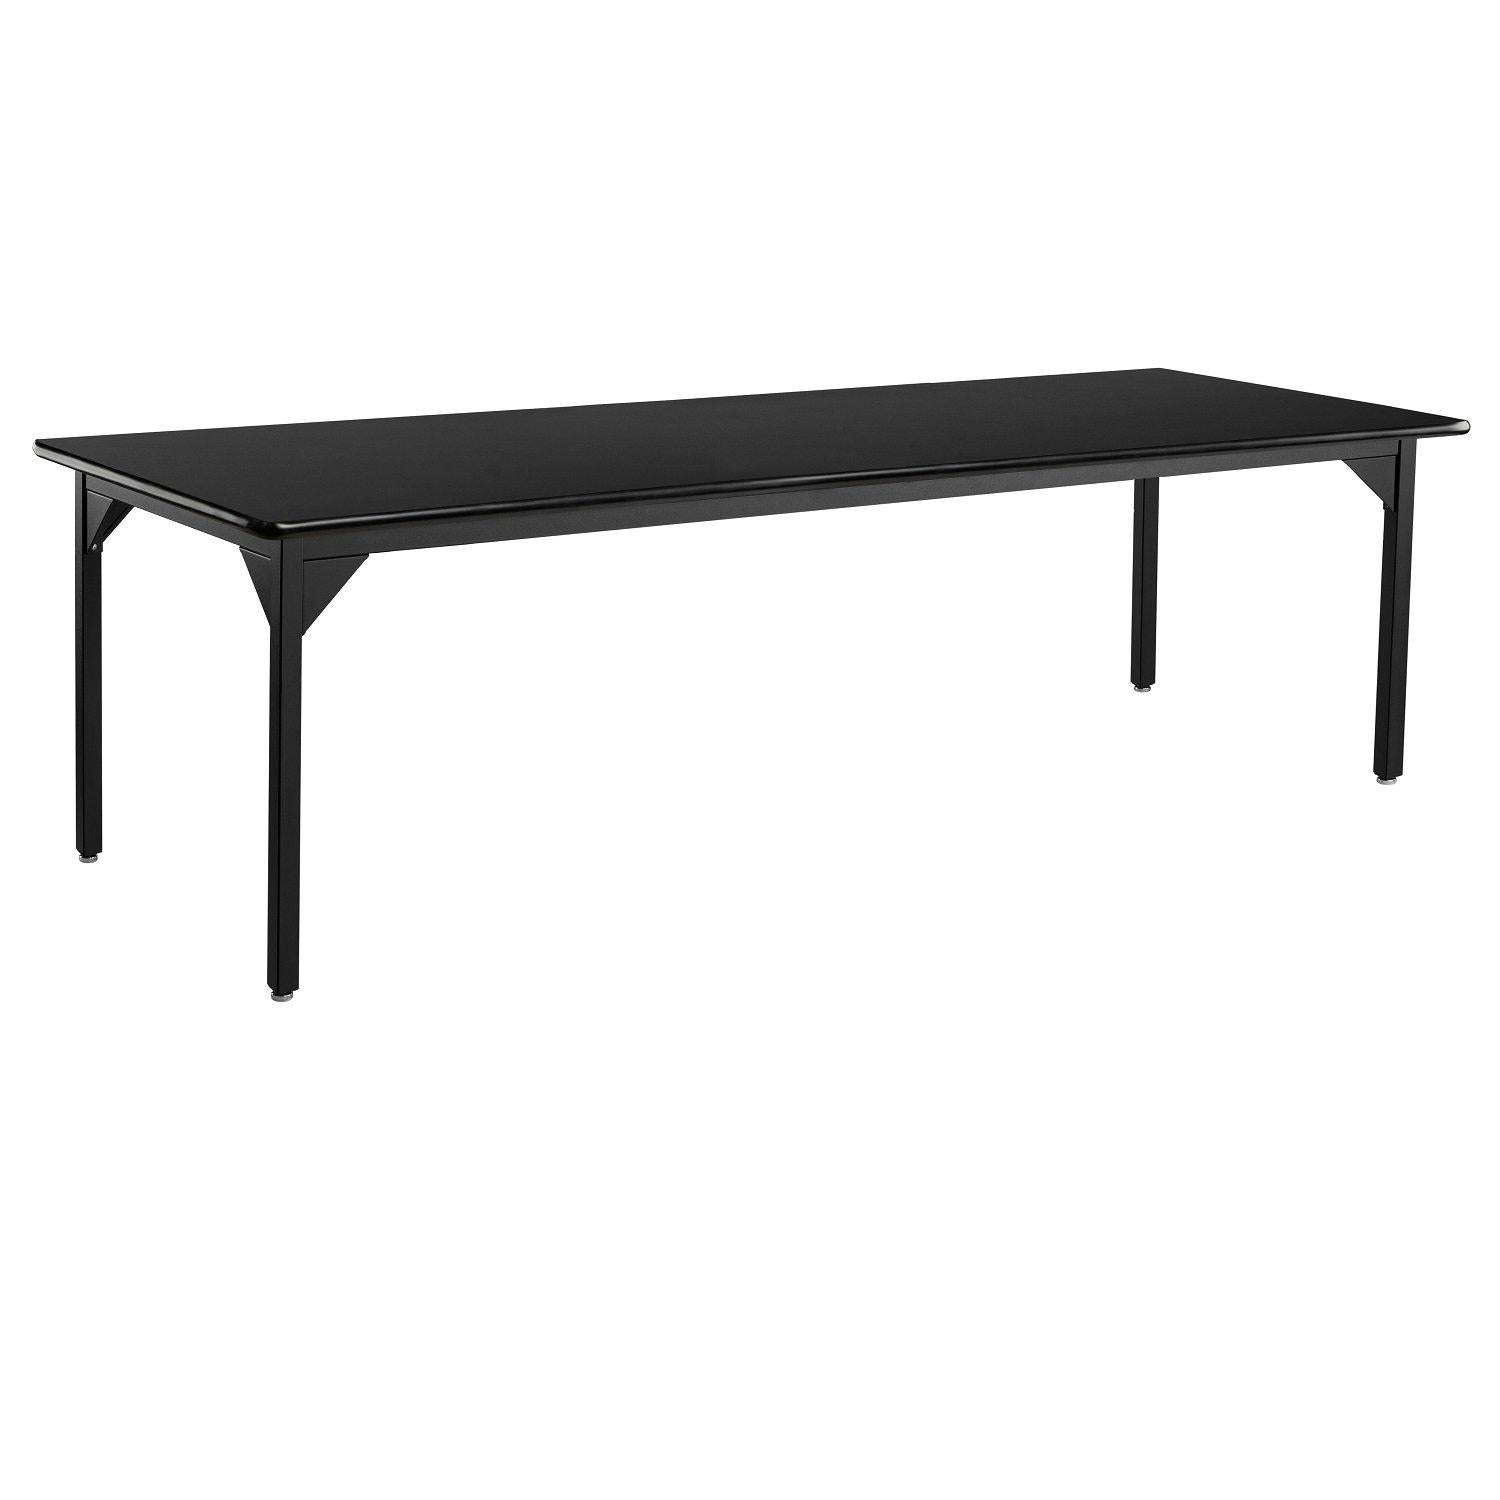 Heavy-Duty Fixed Height Utility Table, Black Frame, 36" x 96", High-Pressure Laminate Top with T-Mold Edge